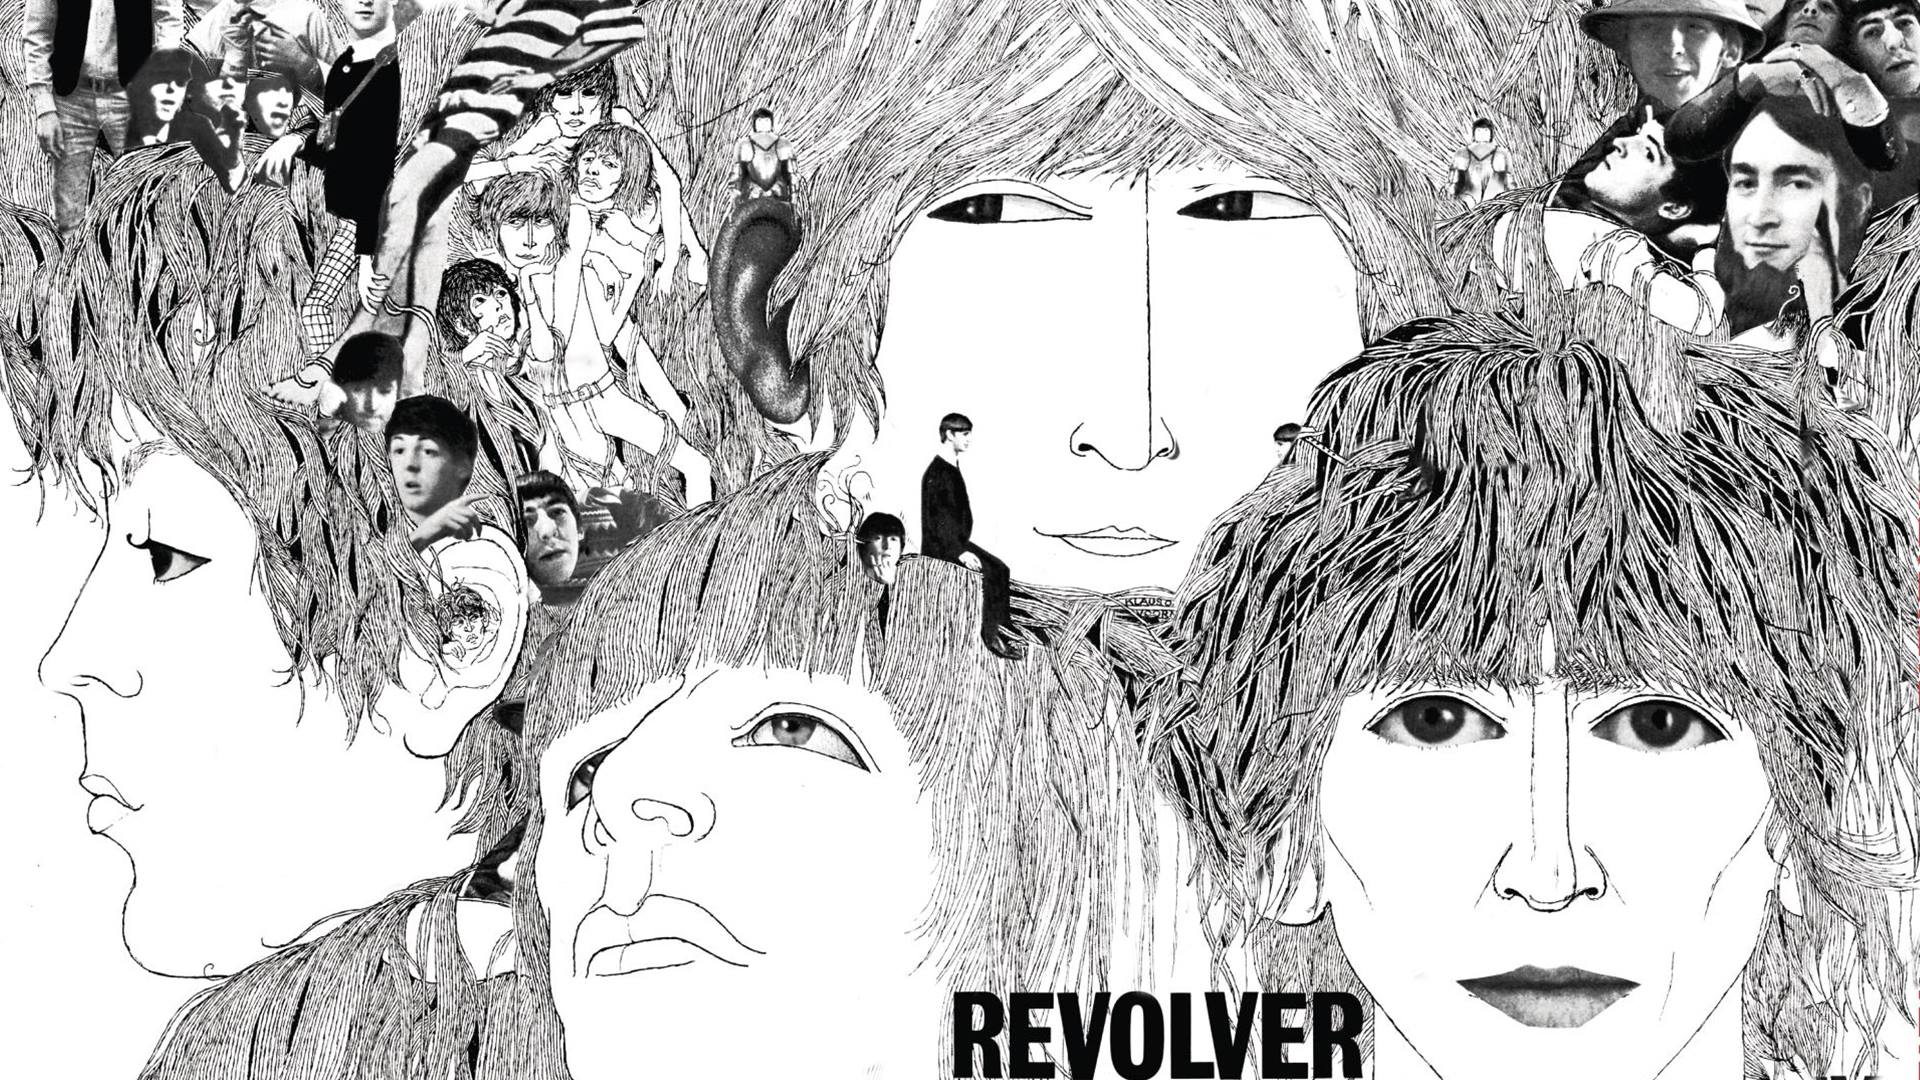 The Best Alternate Takes From The Beatles Revolver | Den of Geek